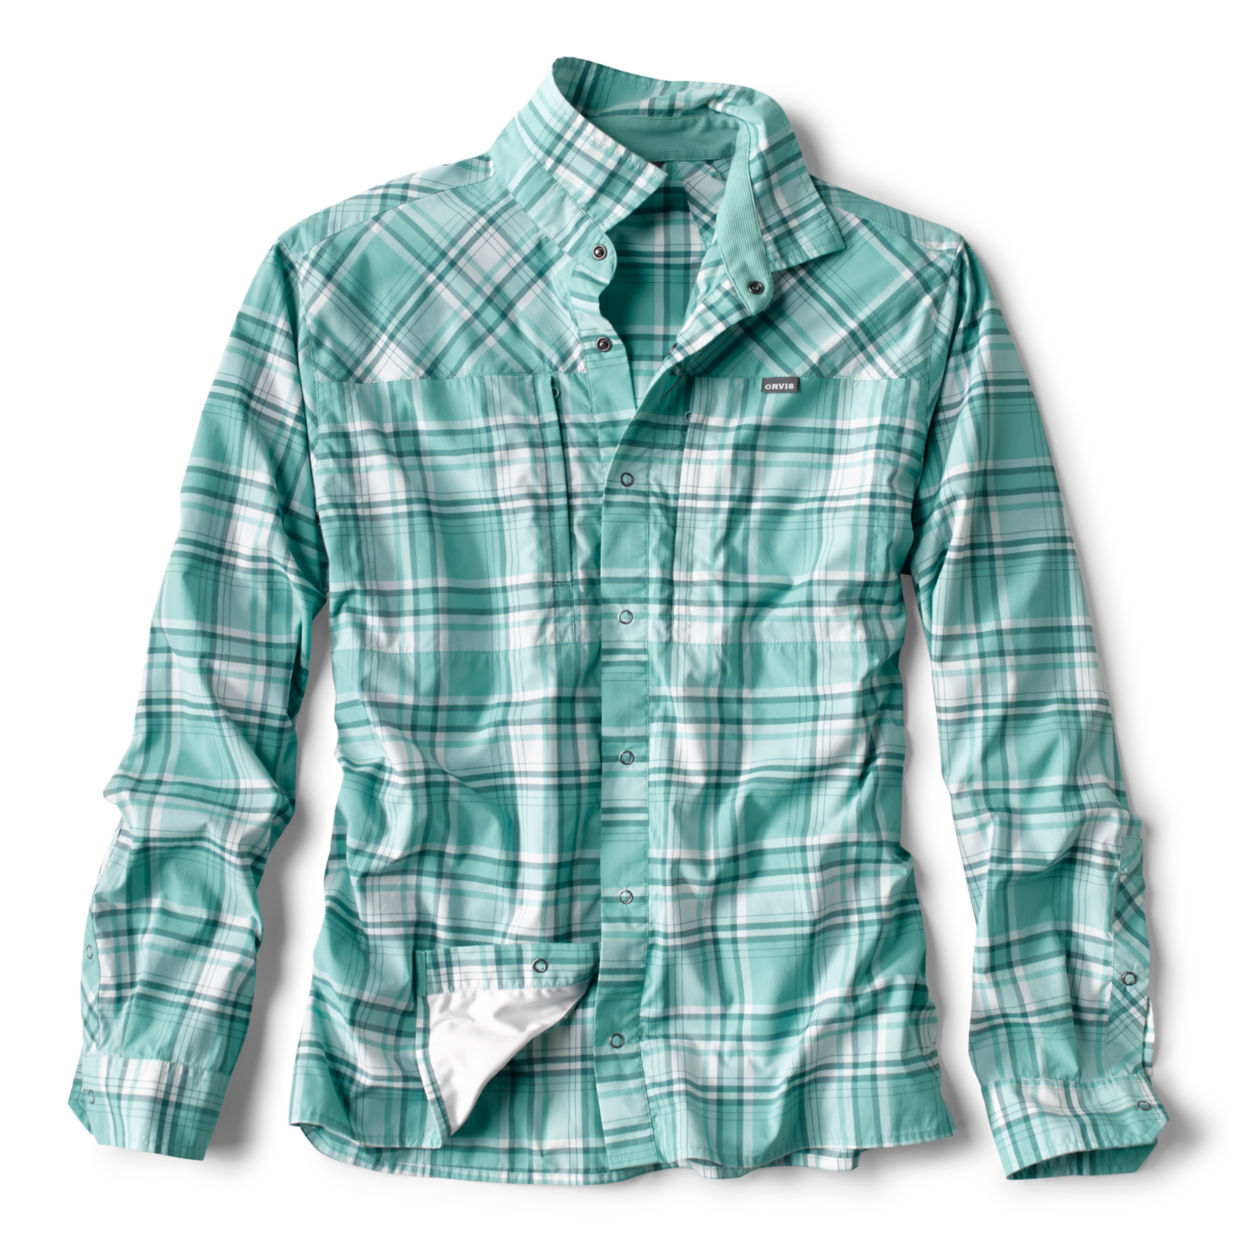 Image of Men's PRO Stretch Long-Sleeved Shirt